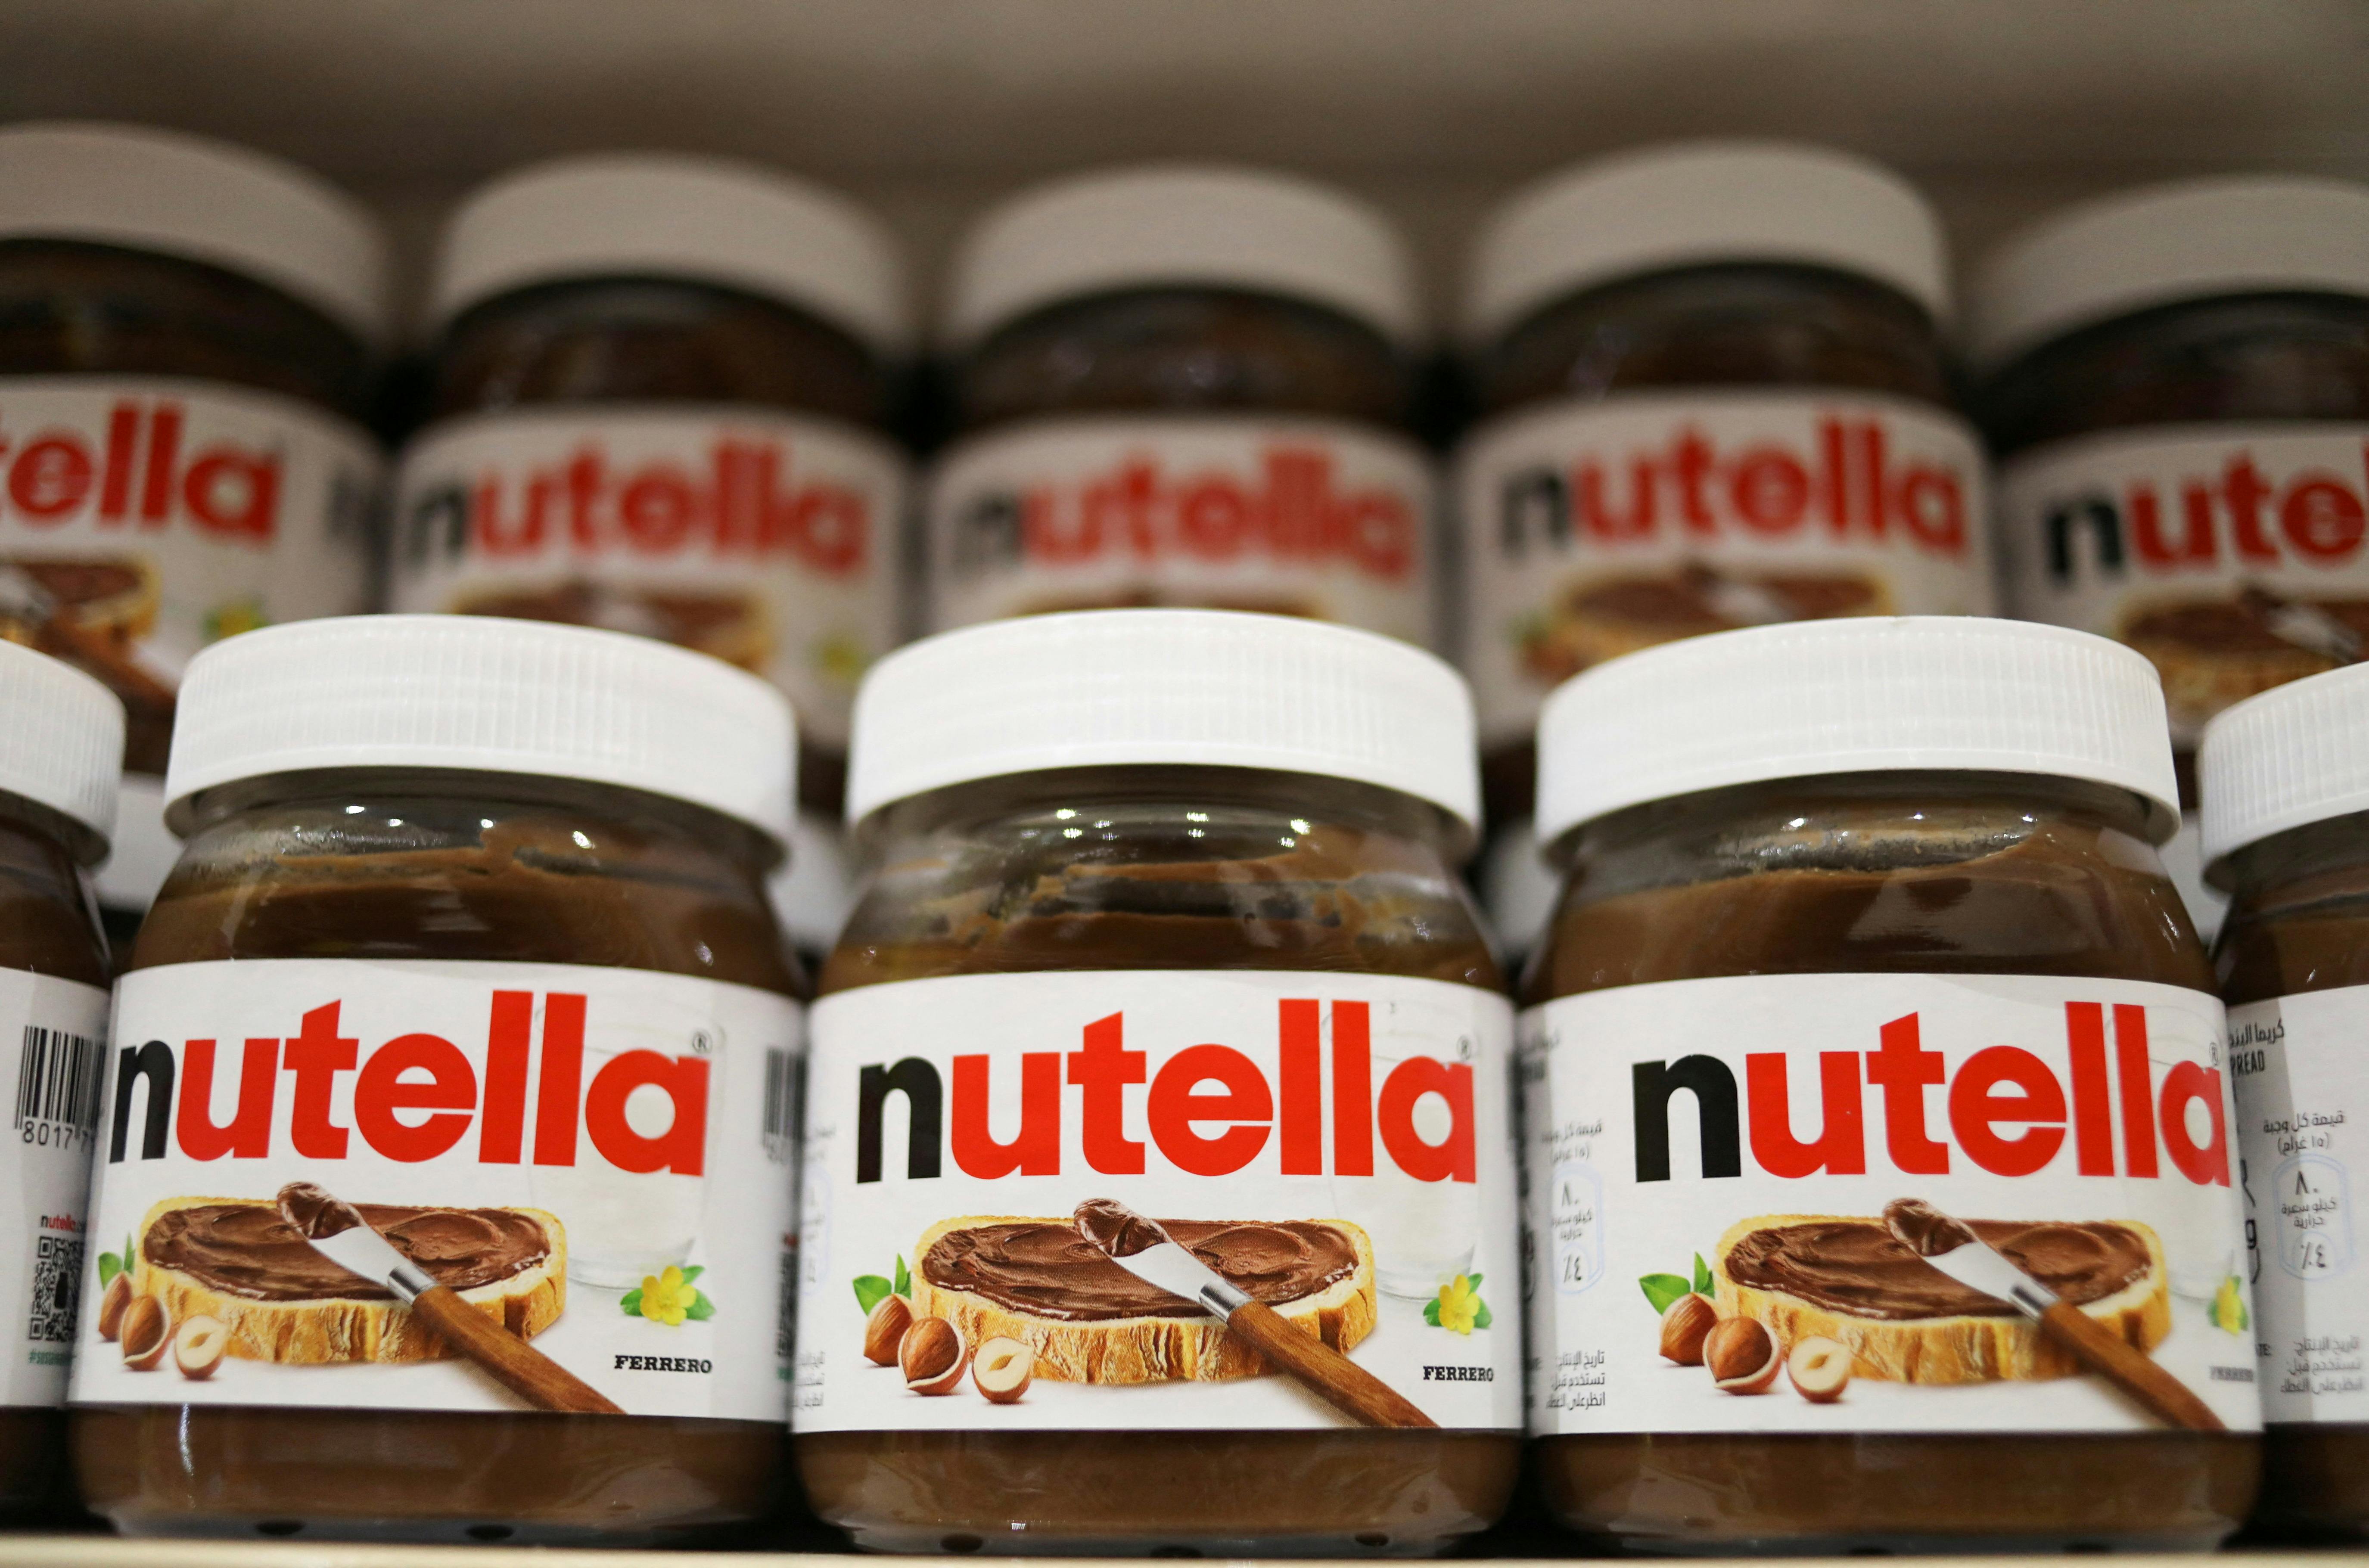 FILE PHOTO: Jars of Nutella spread produced by Italian confectionary maker Ferrero are displayed at a supermarket's shelf in Subang Jaya, Malaysia, April 14, 2022. Picture taken April 14, 2022. REUTERS/Hasnoor Hussain/File Photo